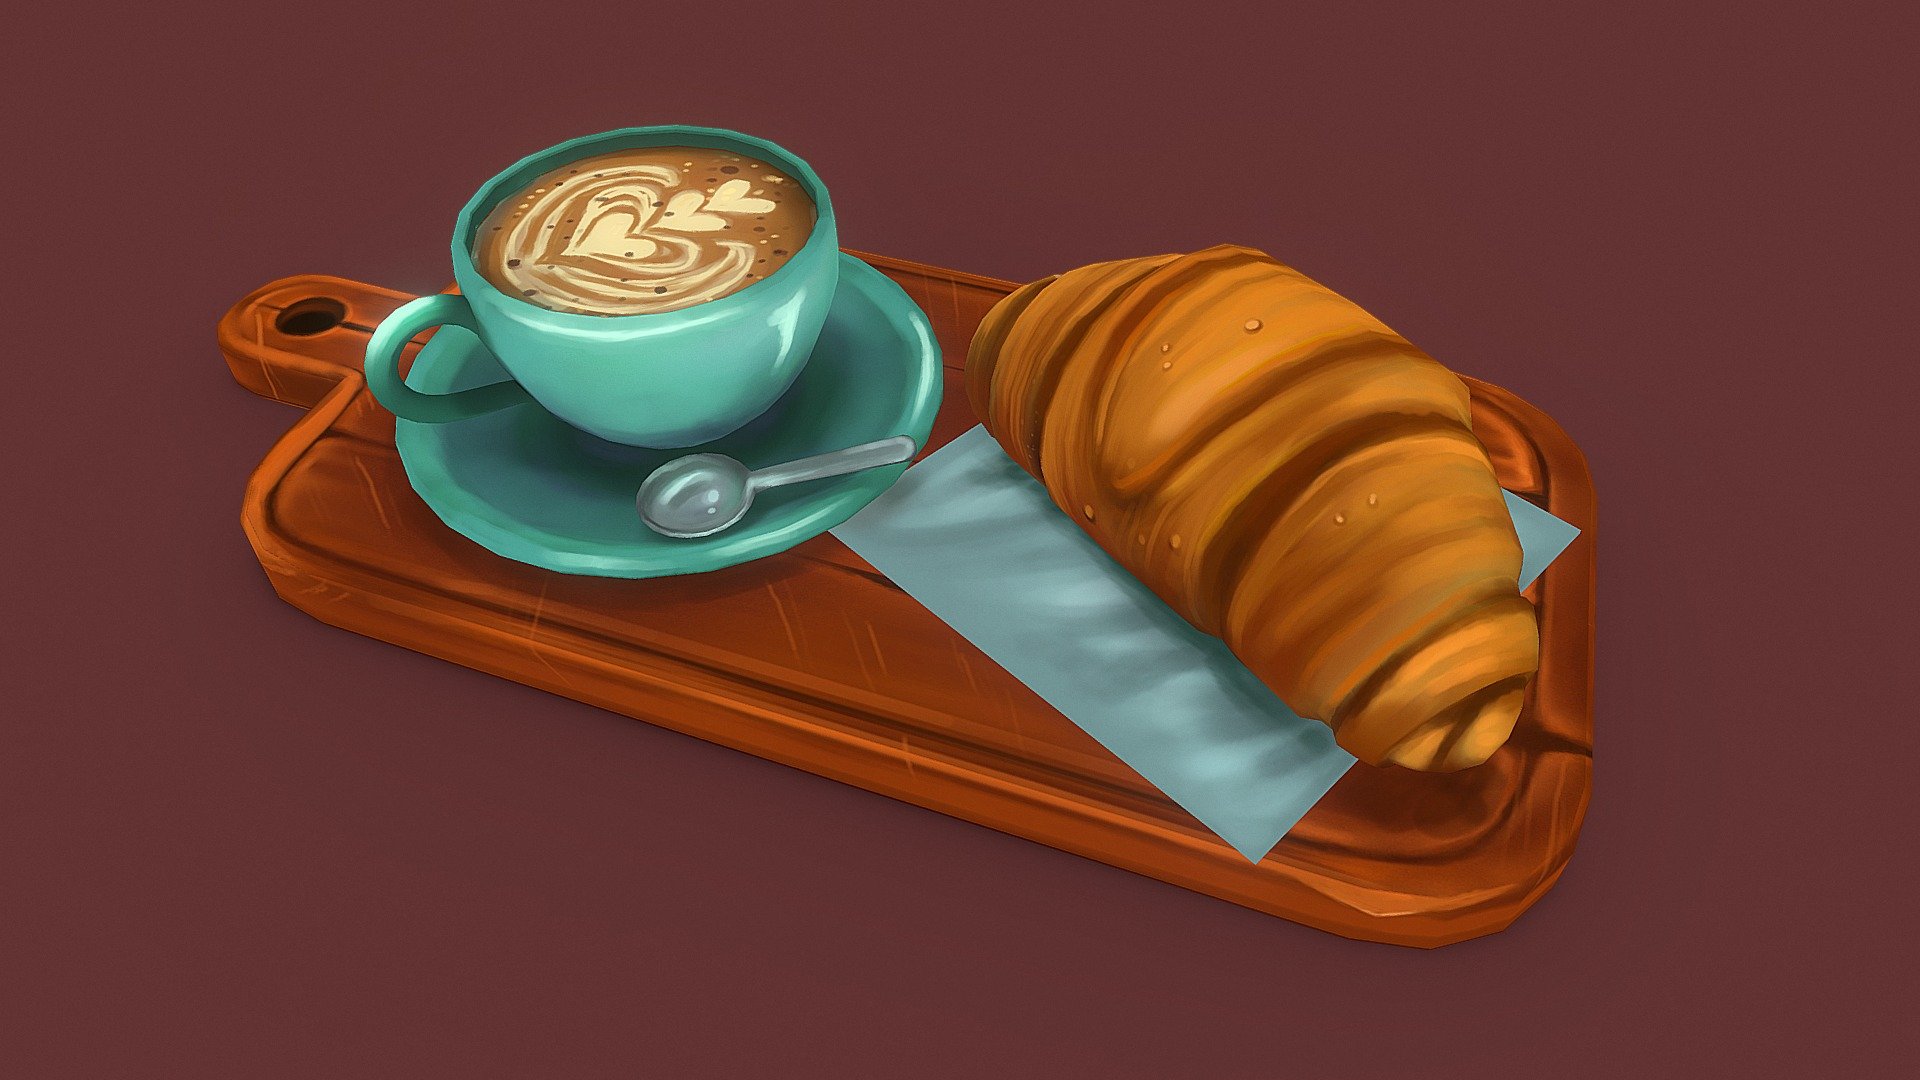 Decided to make this for the Sketchfab Weekly prompt: Coffee. This was super fun to make and took about a full day in total to model and handpaint. Very much inspired by cottage core aesthetic and kept it stylized/fun 3d model